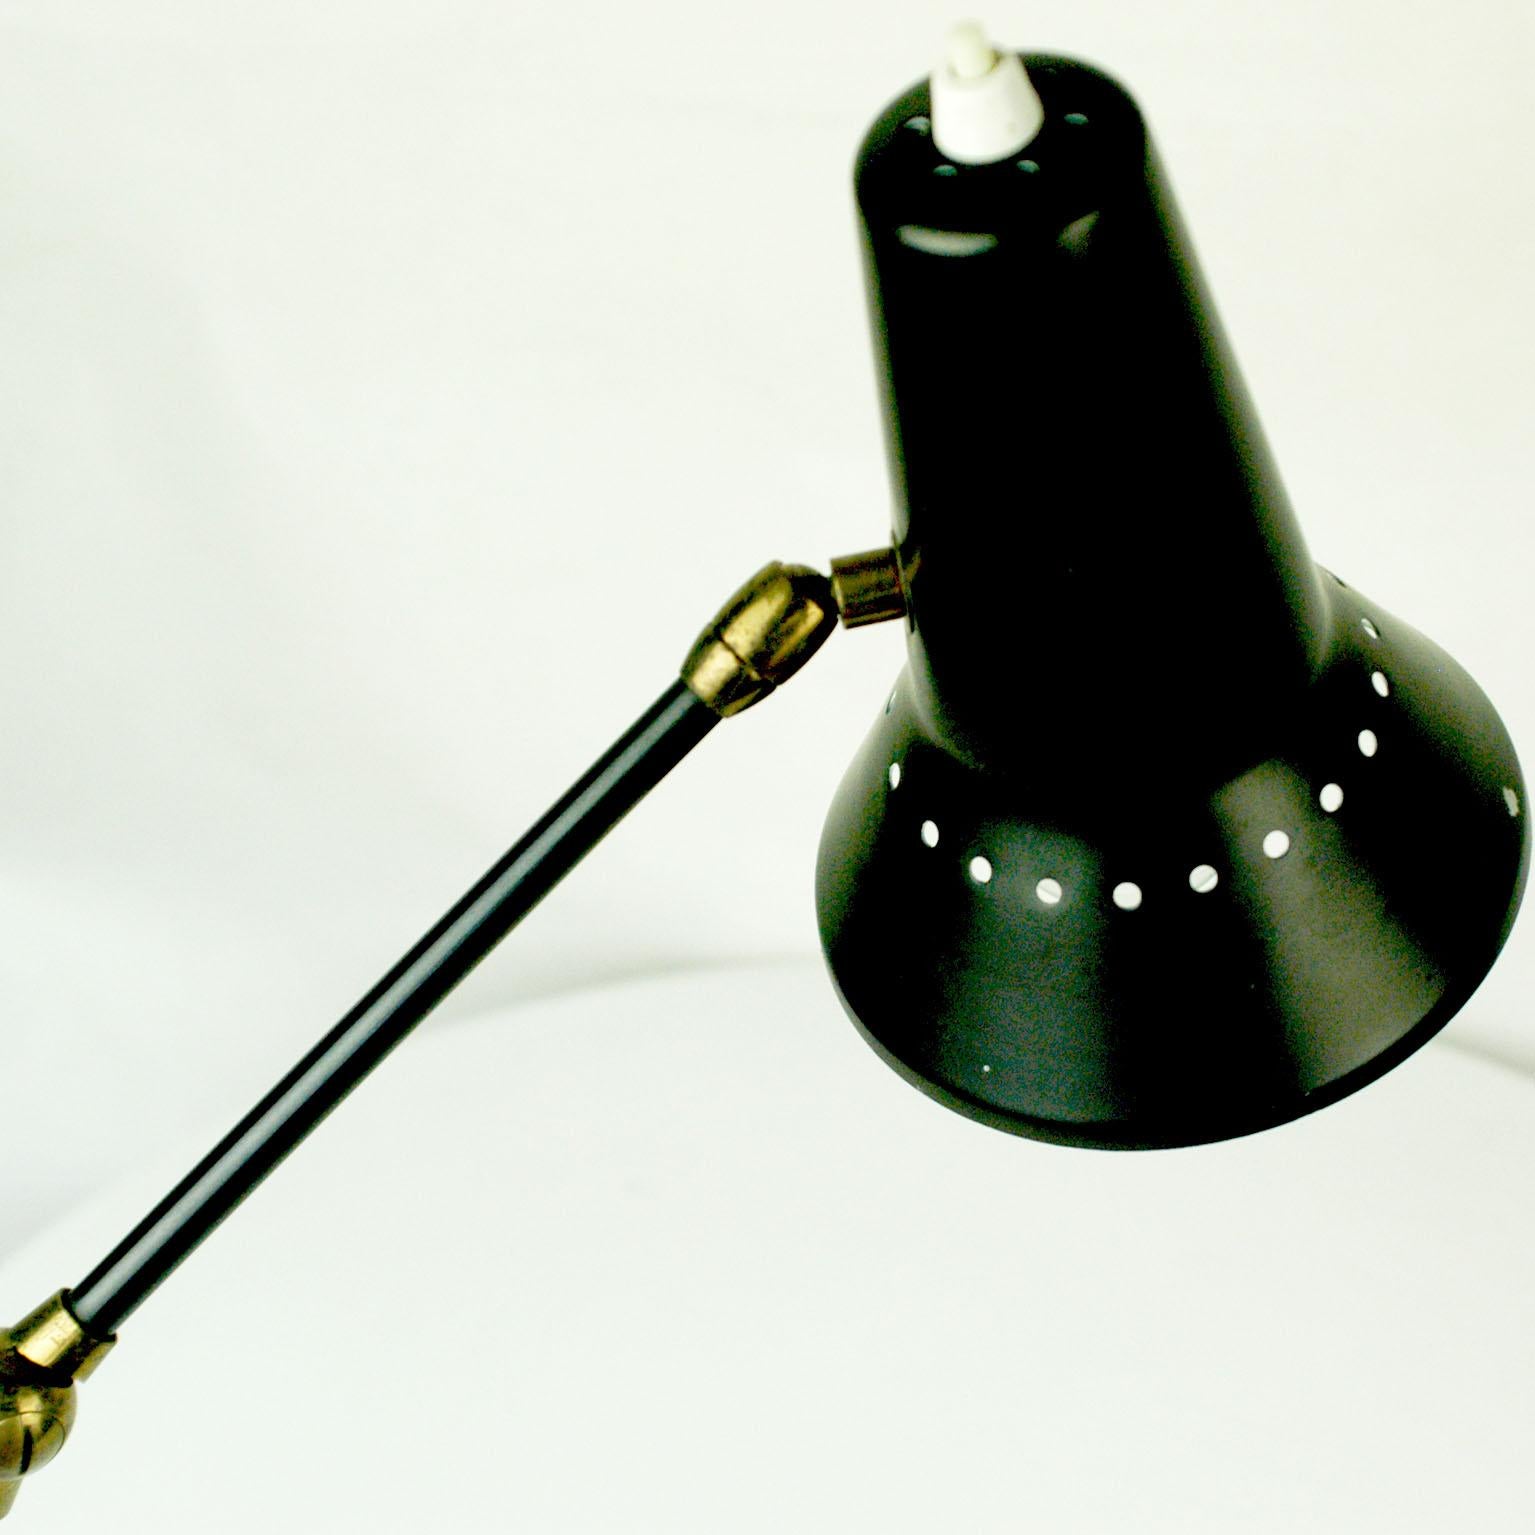 This Charming Italian 1950s brass clamp desk or table lamp with black lacquered adjustable and perforated shade has been manufactured by Stilnovo in the 1950s. The lamp has two more links so it can be adjusted in lot of different positions. The